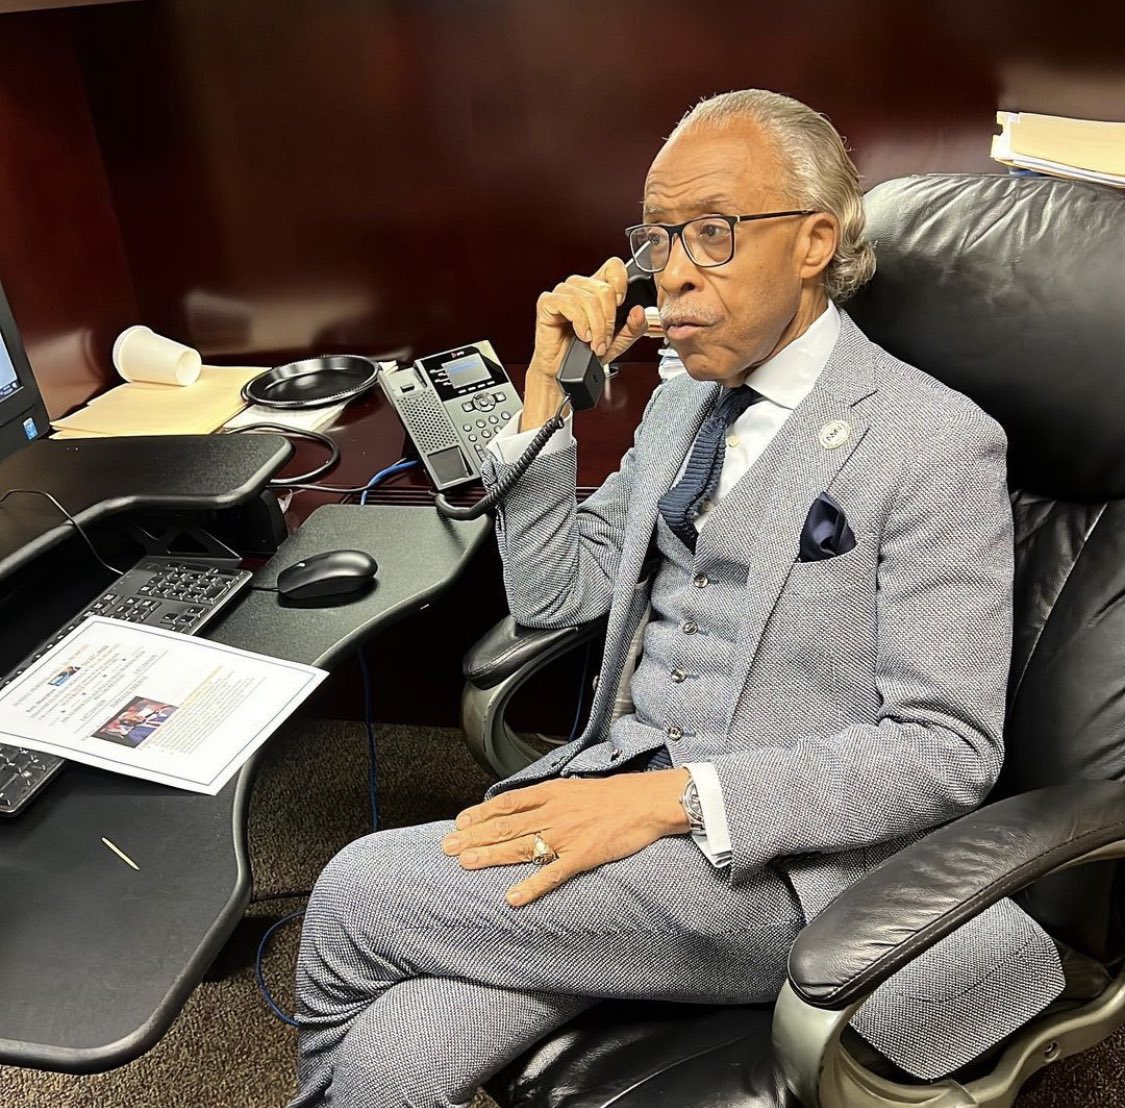 Live from Elizabeth Baptist Church in ATL, Sunday Morning w/ Al Sharpton from 9-10 am/et on FM’s nationwide. Call in at 877 544 6290